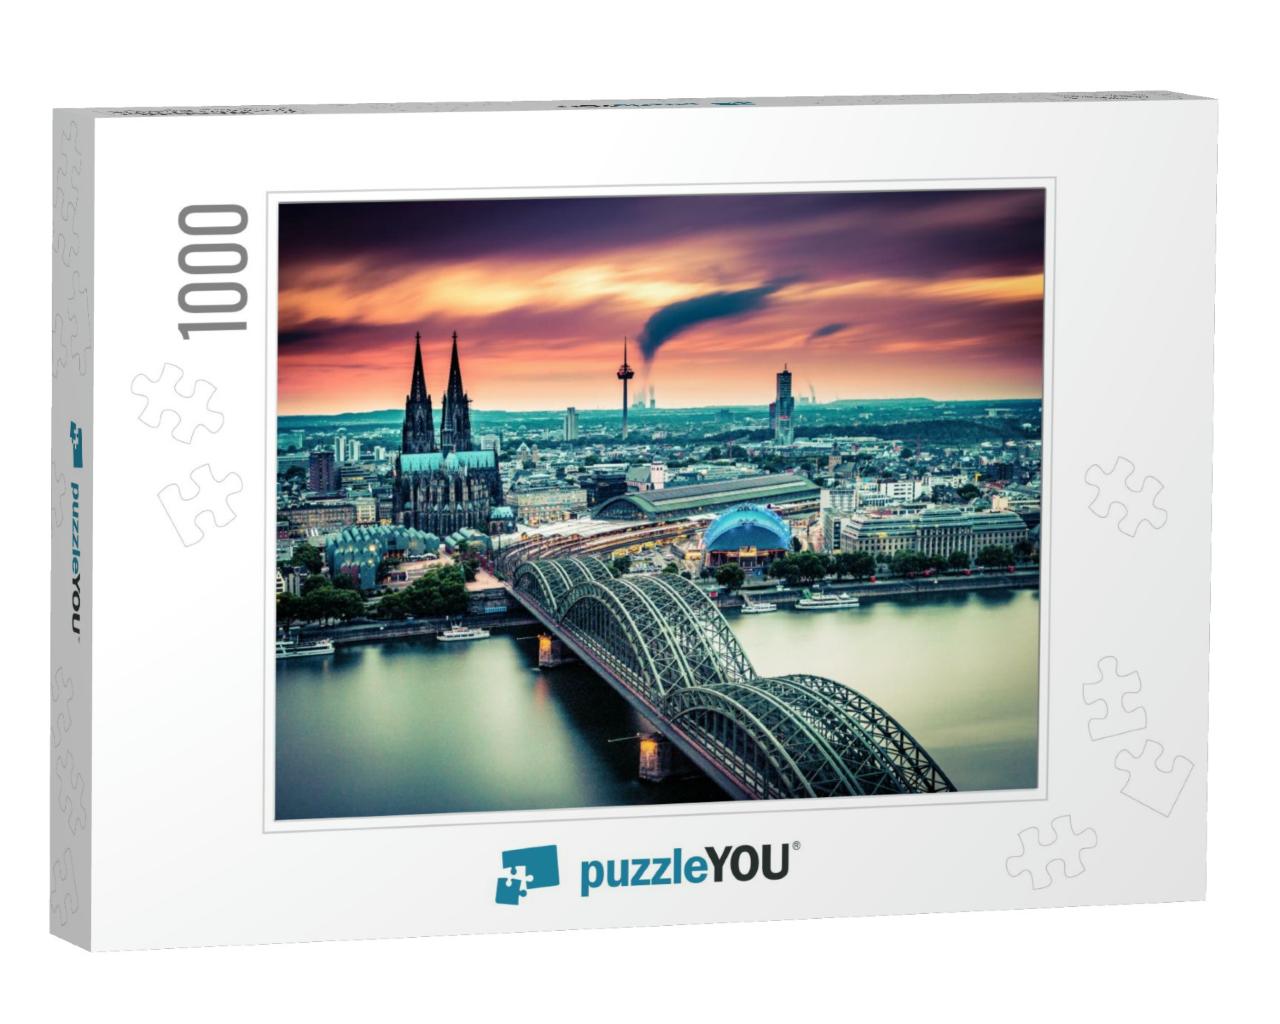 Long Exposure Sunset Moving Clouds Over the City Cologne... Jigsaw Puzzle with 1000 pieces